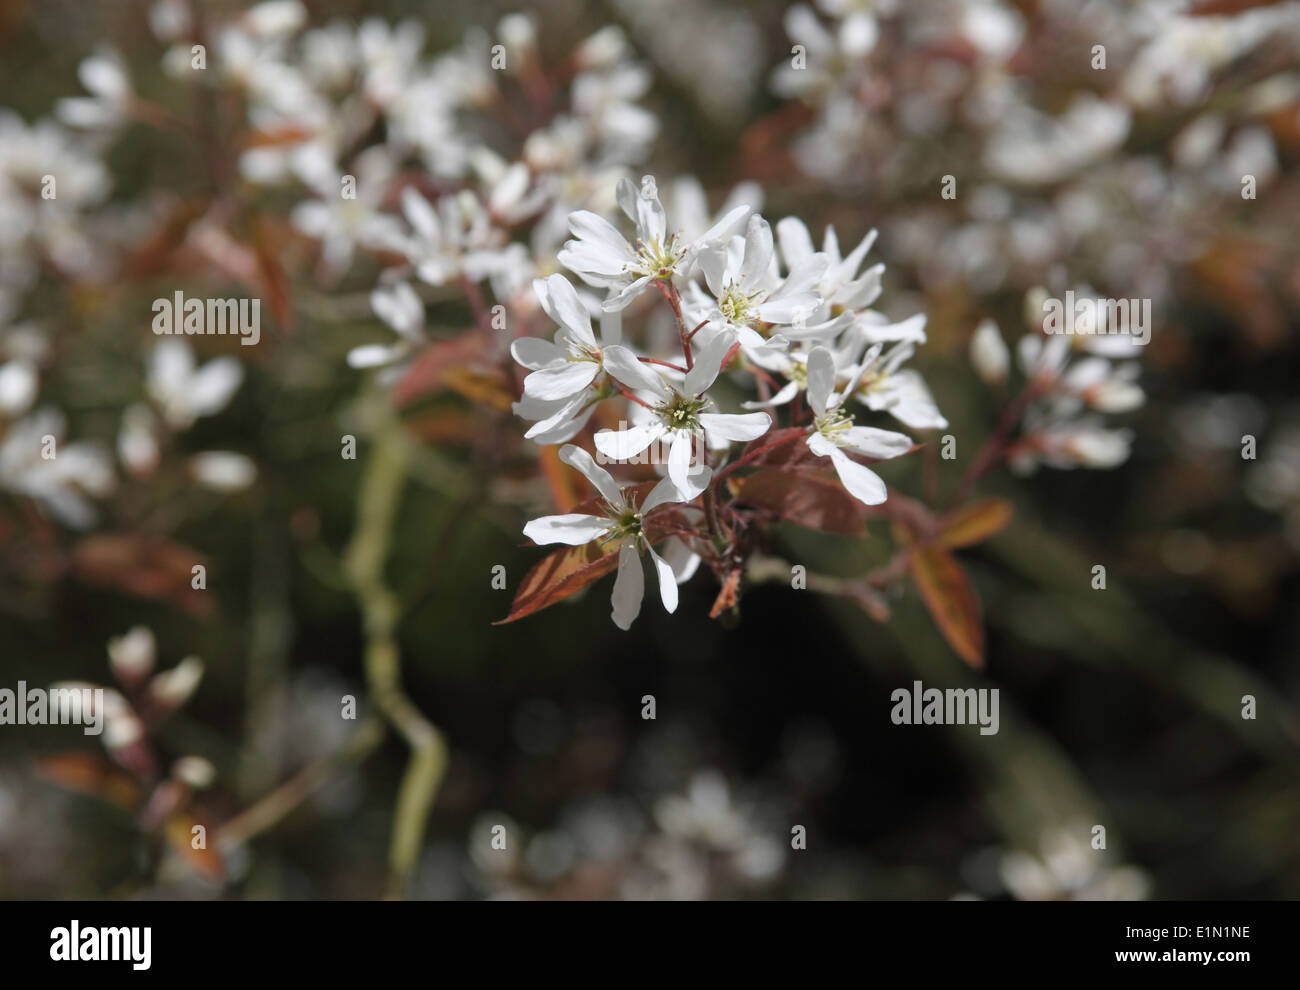 Amelanchier canadensis close up of flowers Stock Photo